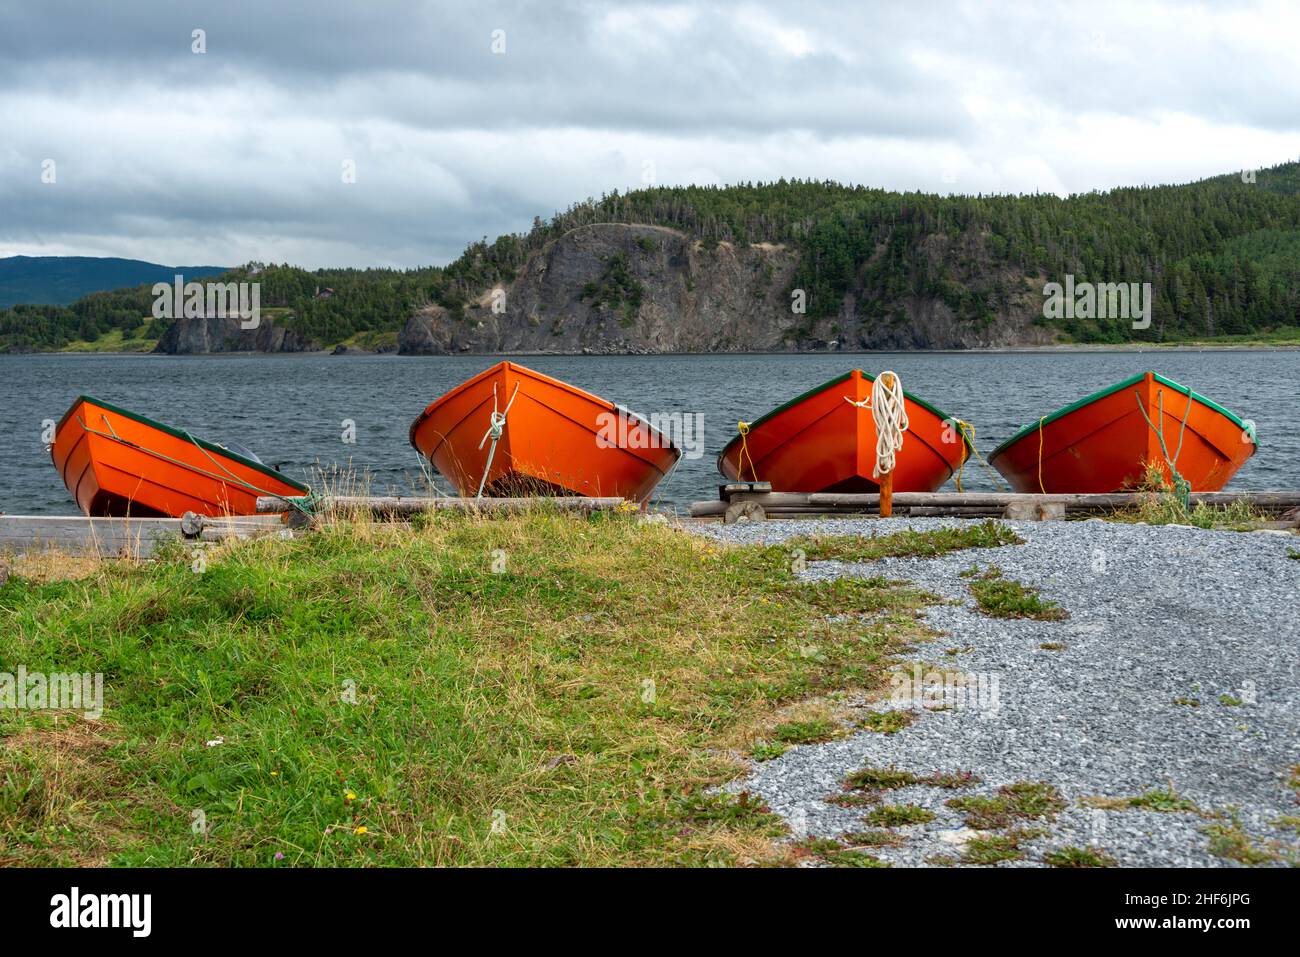 Bright, colorful, orange and green wooden traditional style fishing vessels, wood boats, on a beach. There are mountains, rocky coastlines, lush green Stock Photo